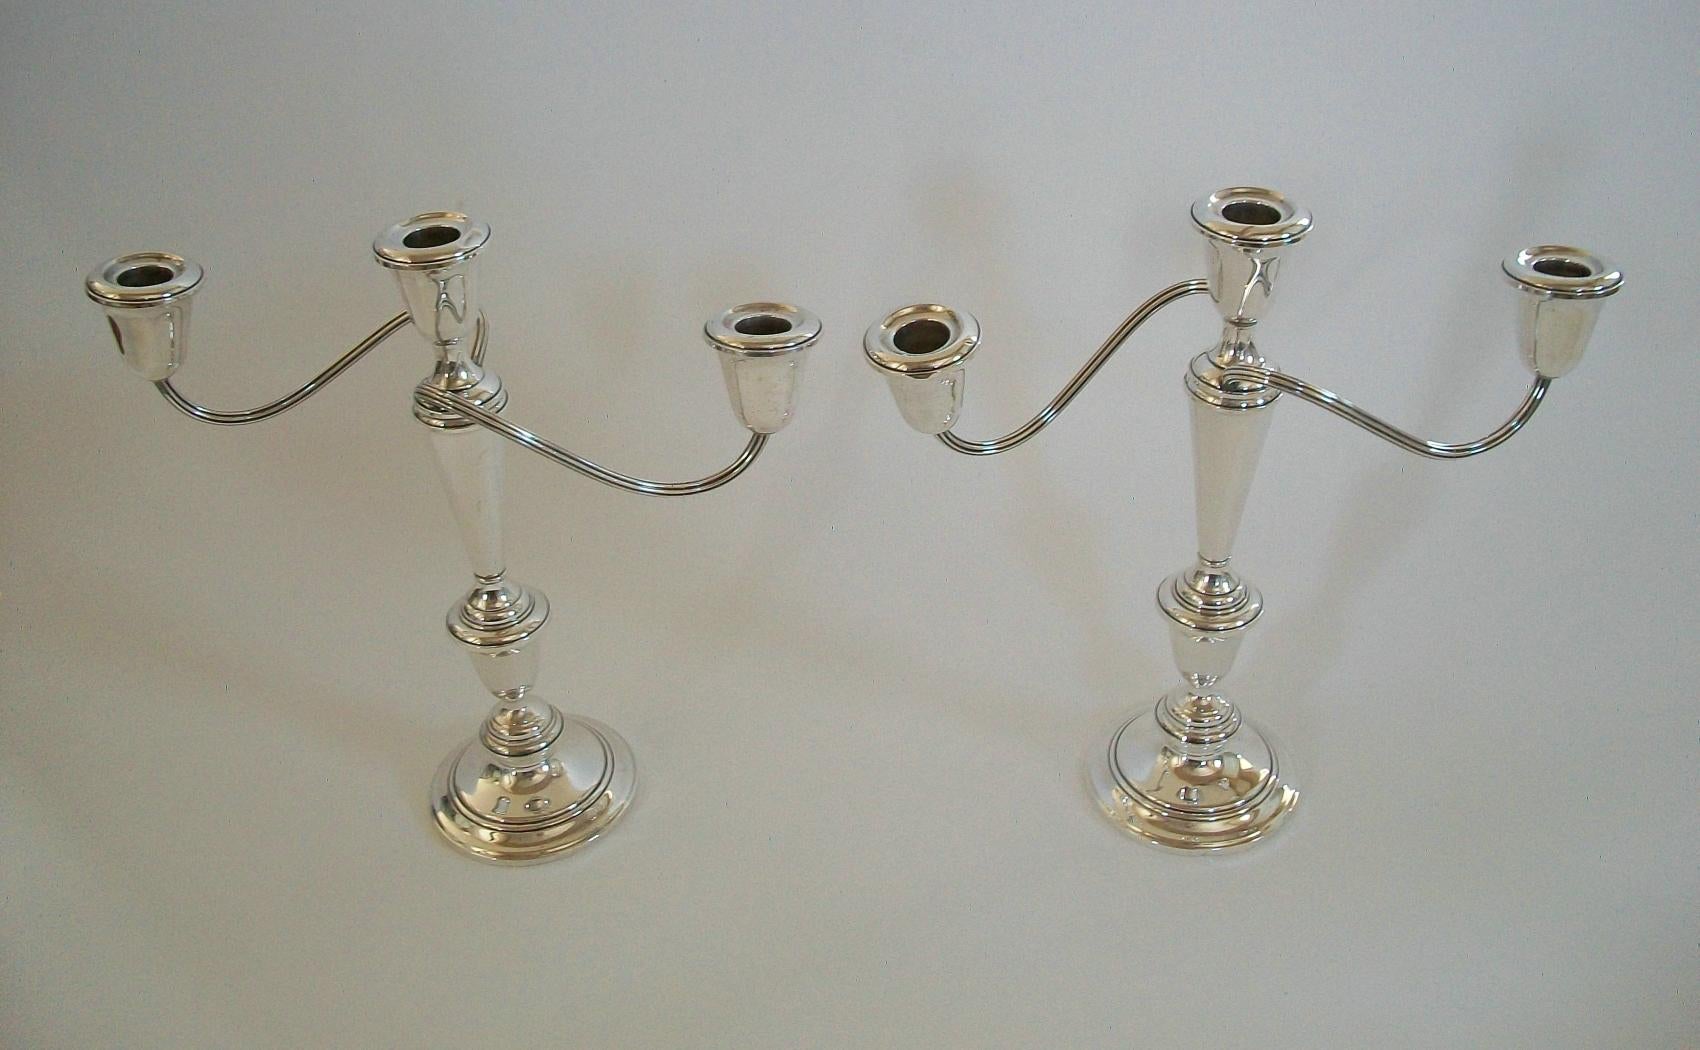 NEWPORT - Pair of Sterling Silver Candelabra - Weighted - U.S.A. - 20th Century In Good Condition For Sale In Chatham, ON